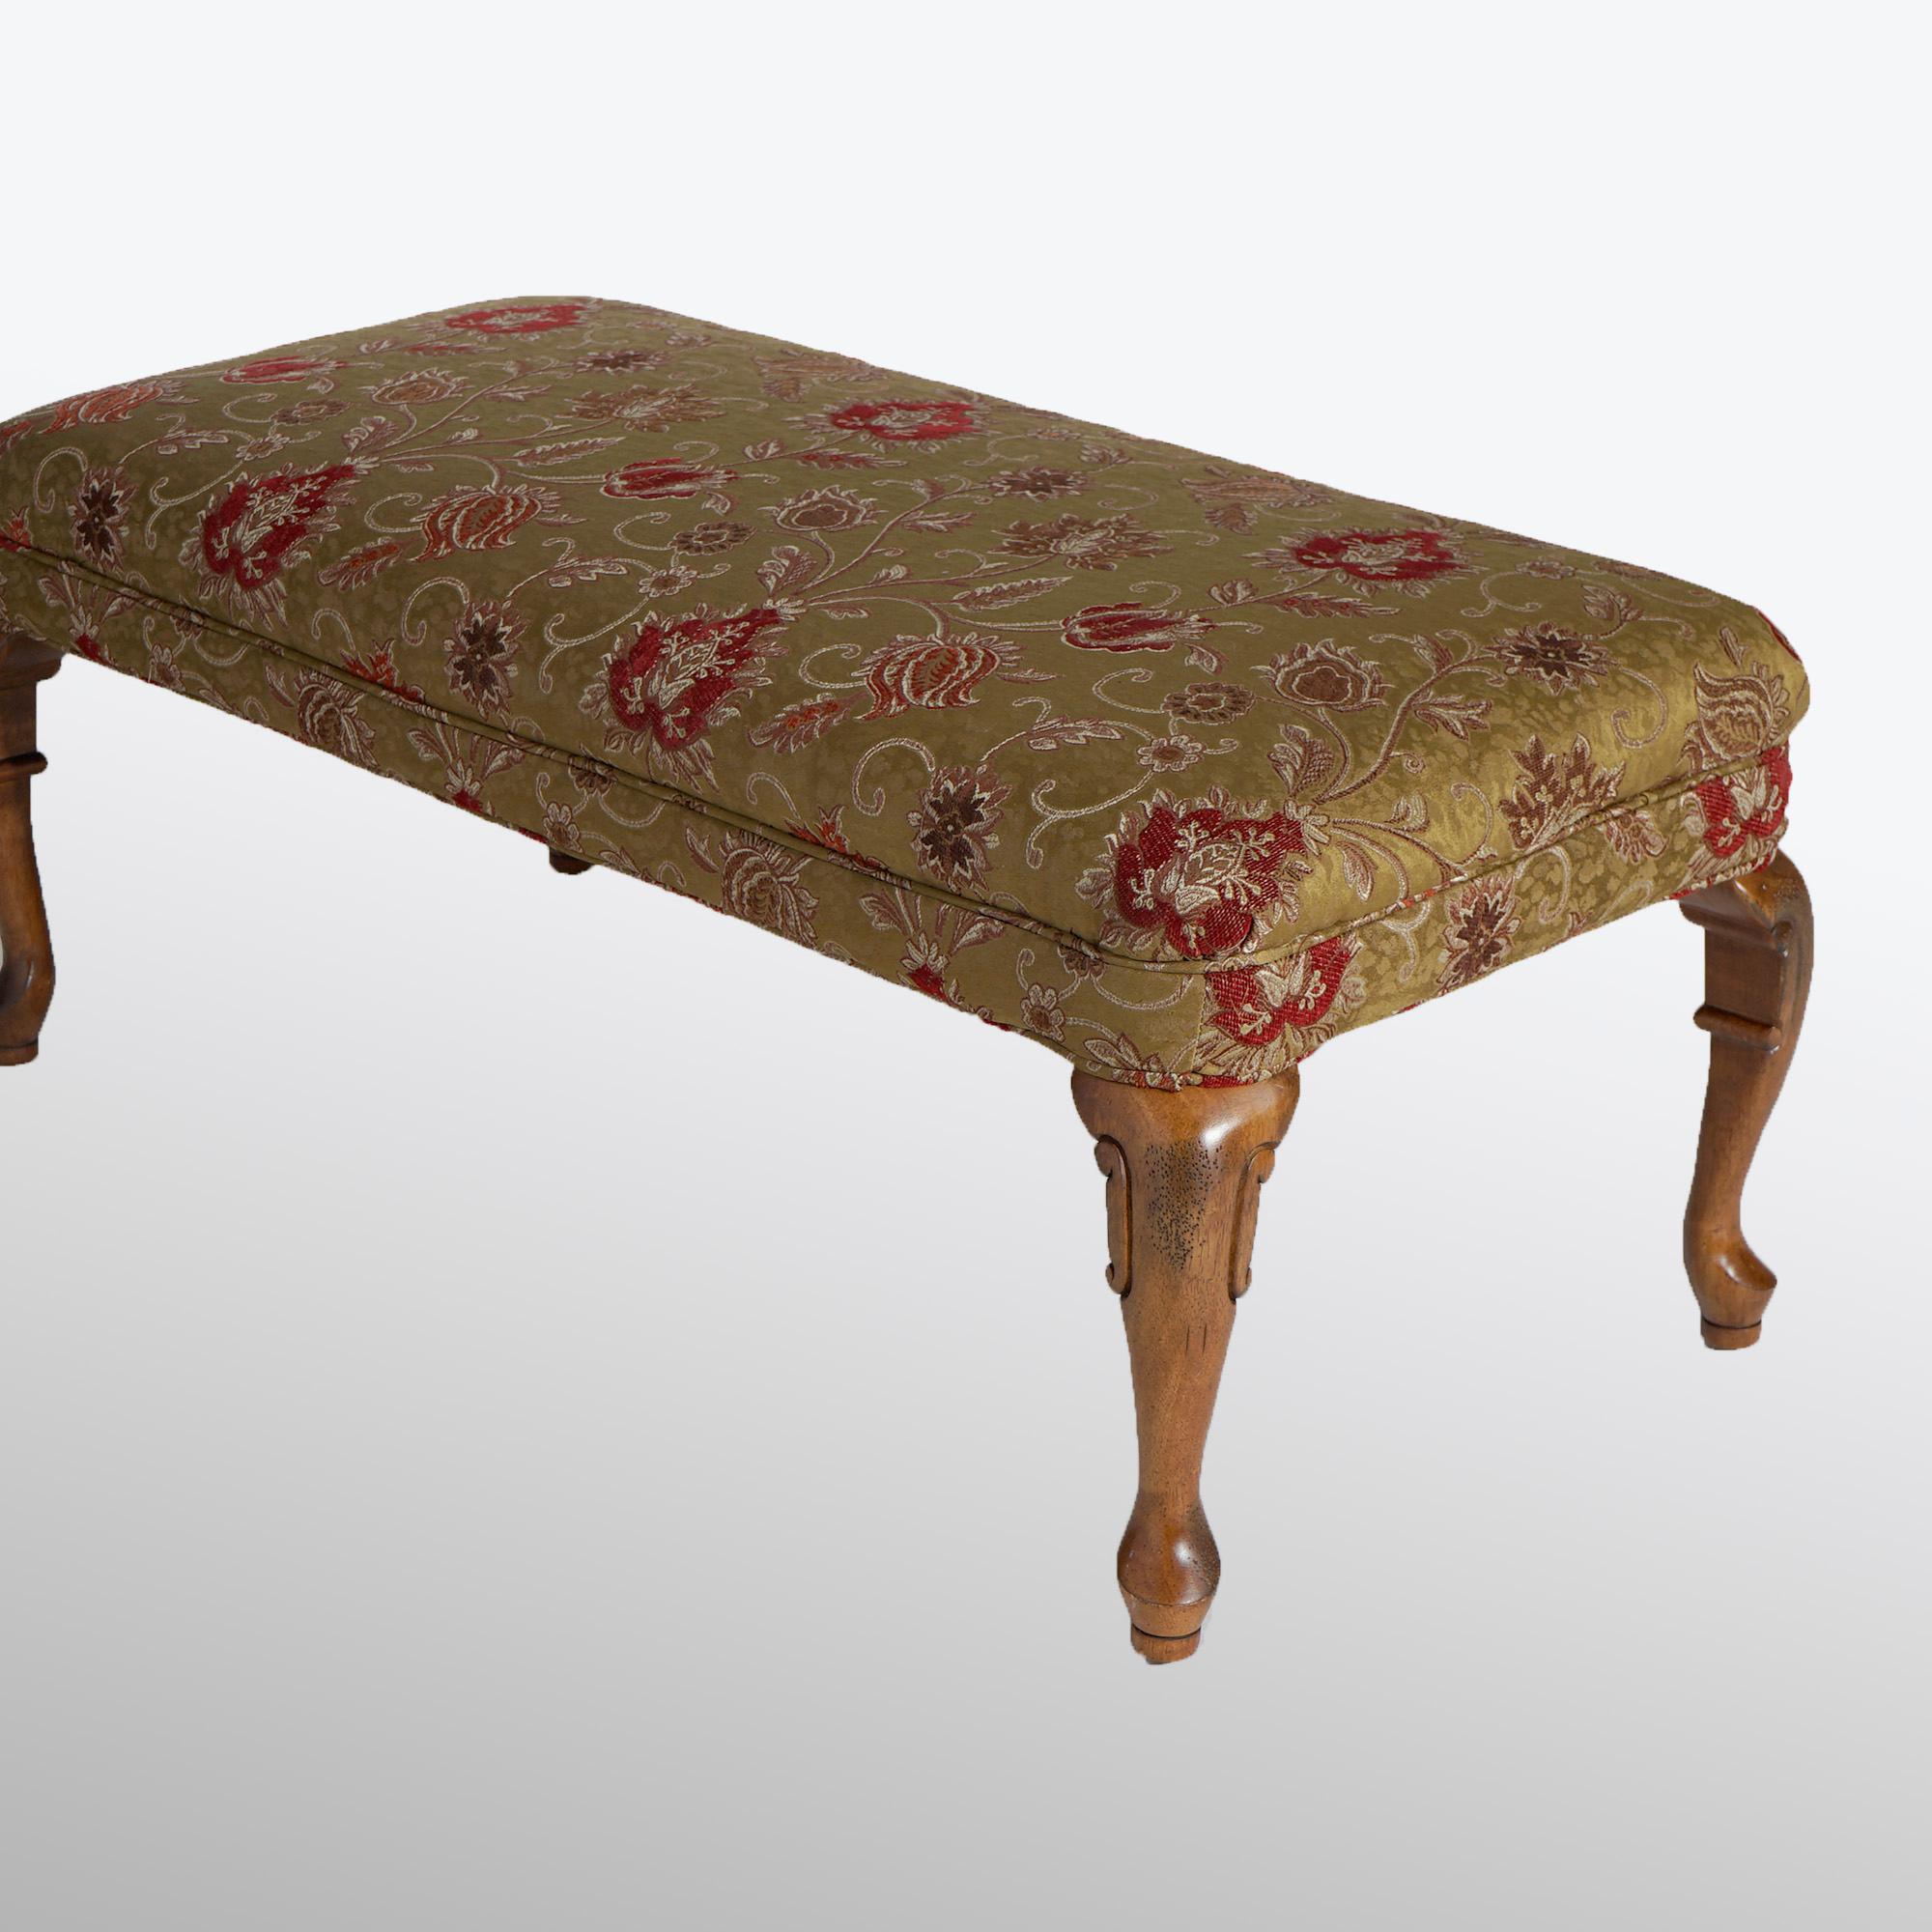 Queen Anne Style Upholstered Mahogany Long Bench 20th C For Sale 1